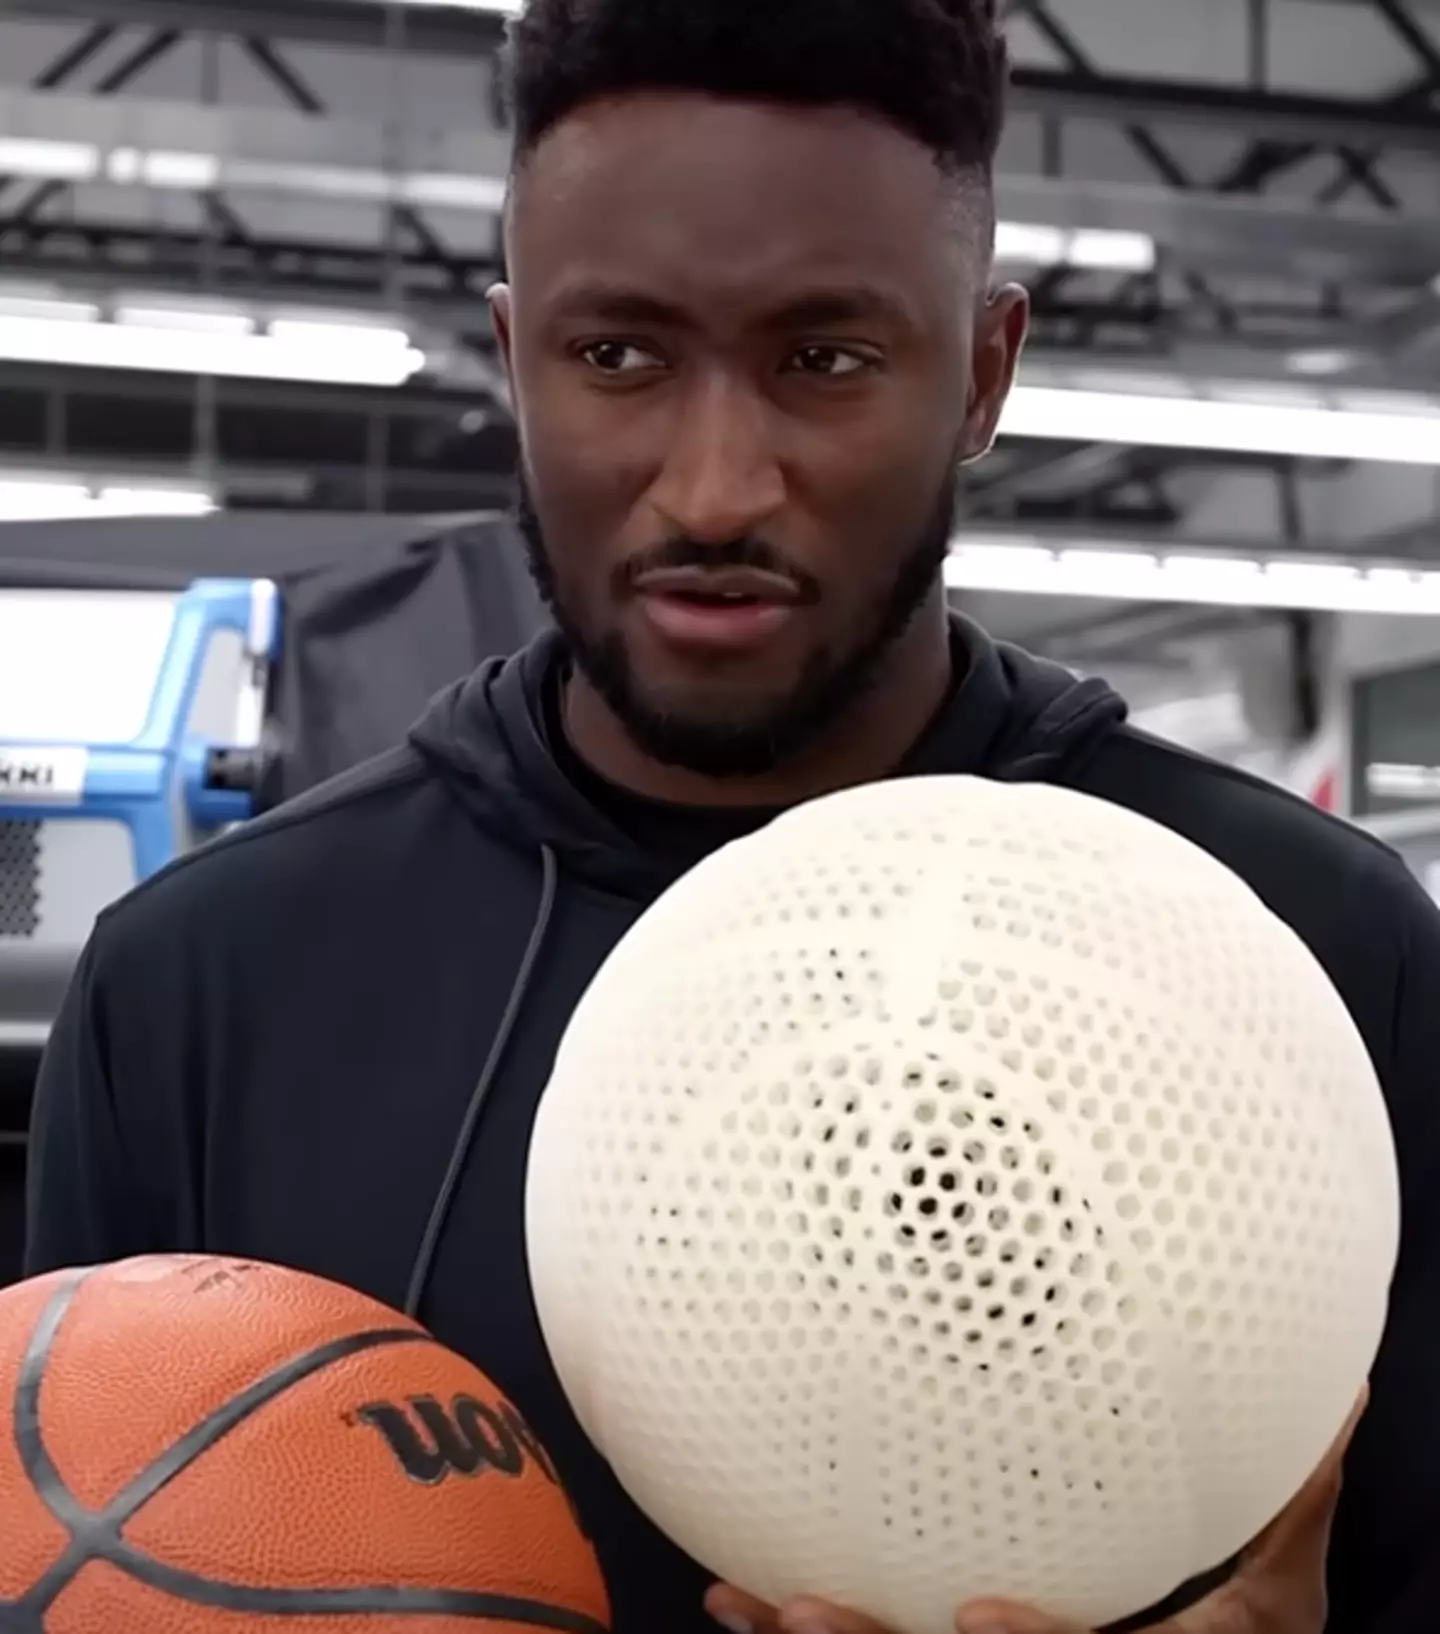 The limited edition ball hasn't impressed everyone / Marques Brownlee